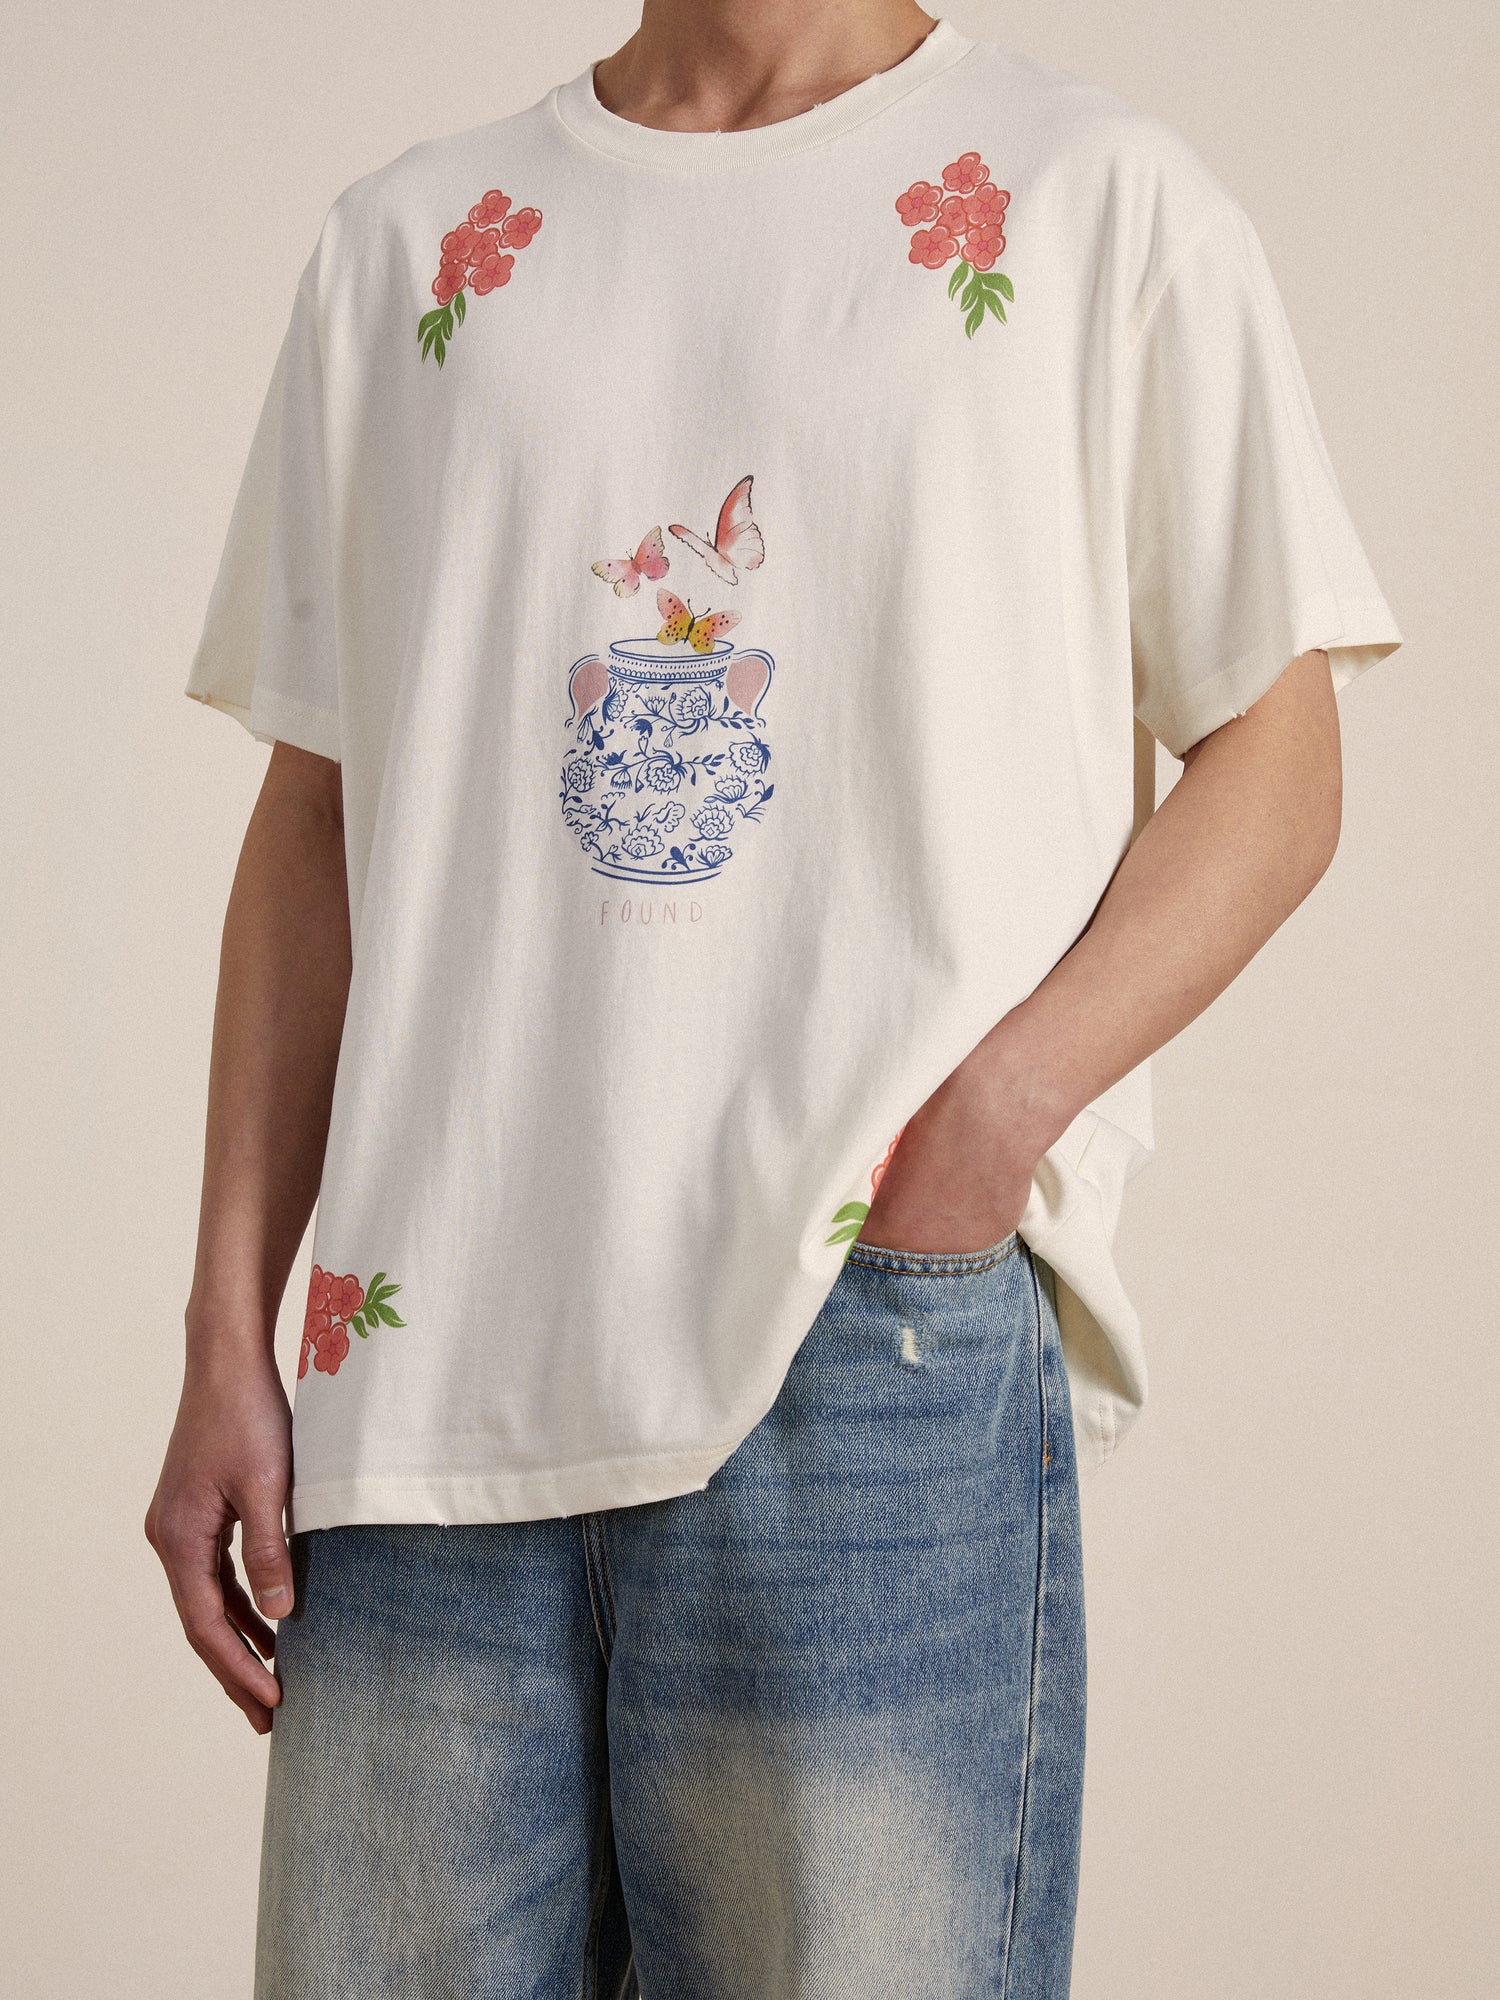 A man wearing a Found Flower Pot Tee and jeans.